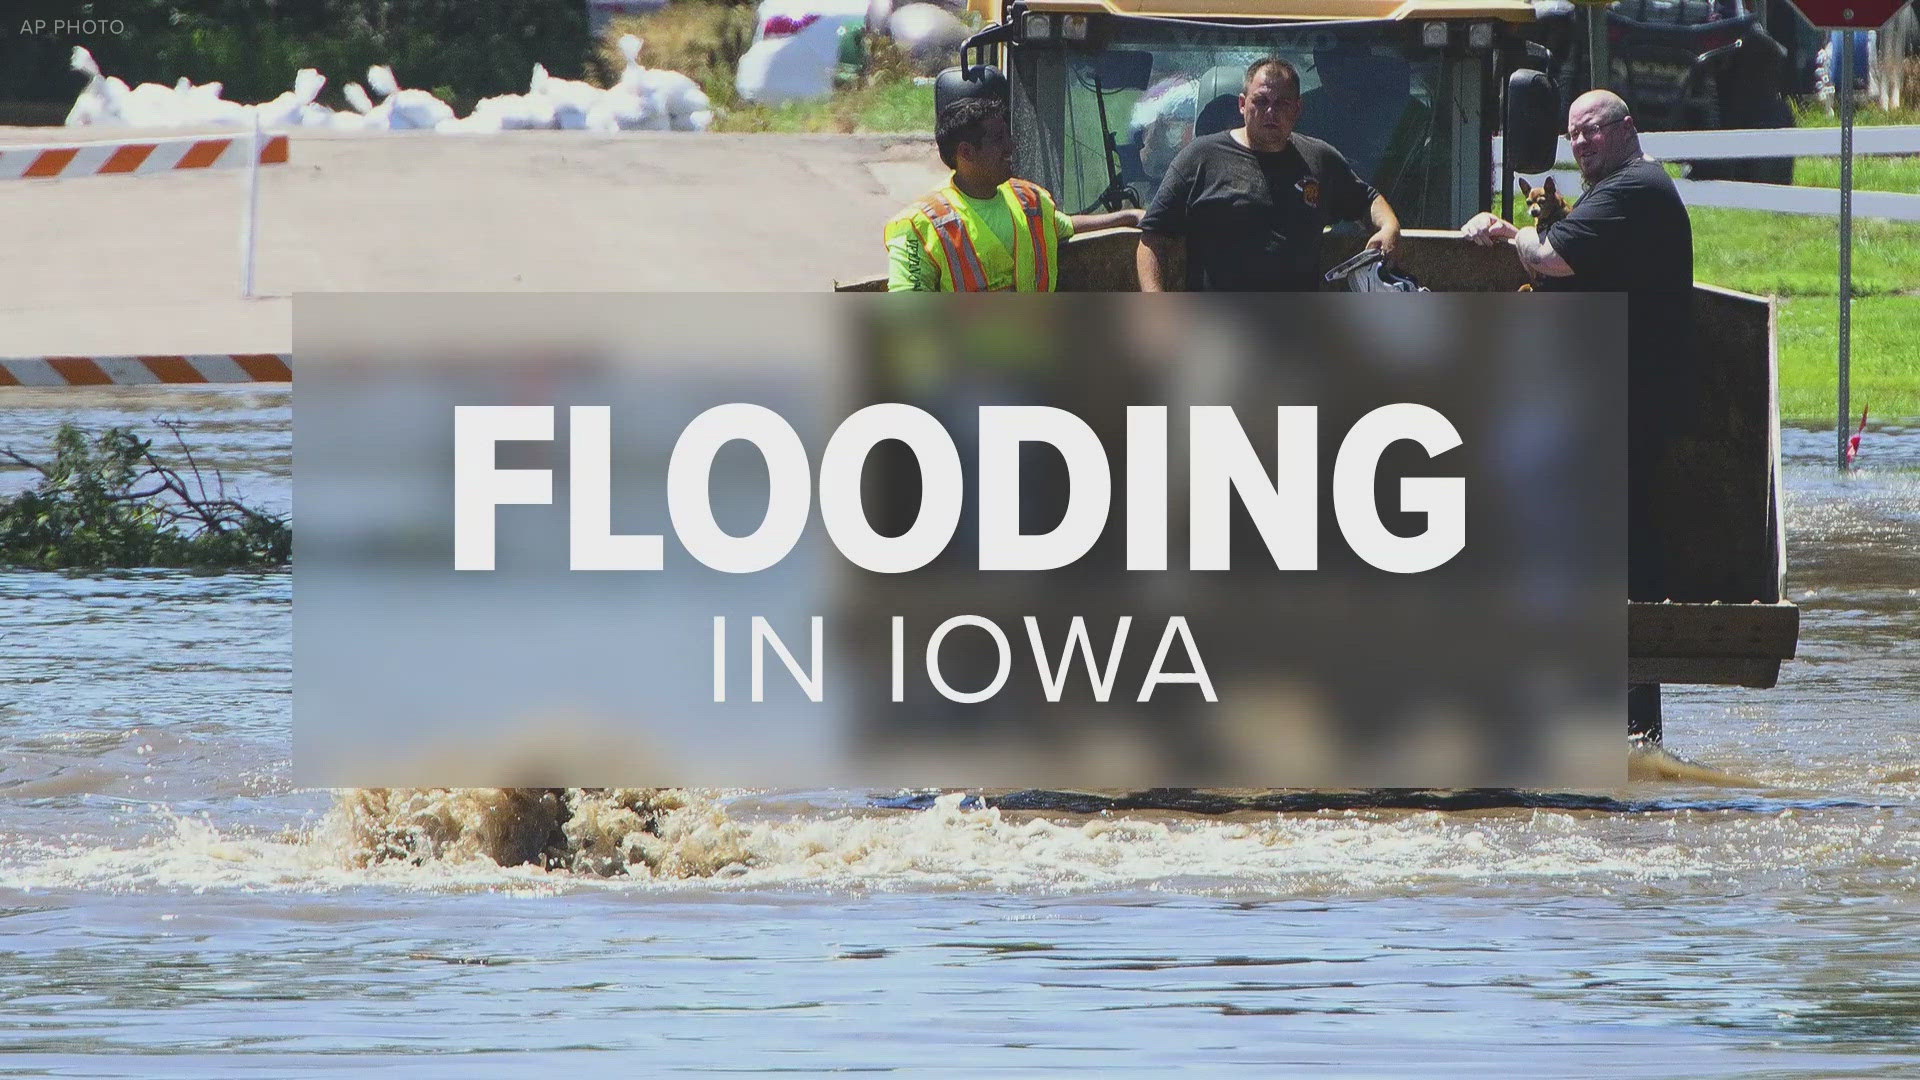 Though some areas are seeing reprieve from flooding, many Iowans still need help recovering from the natural disaster.